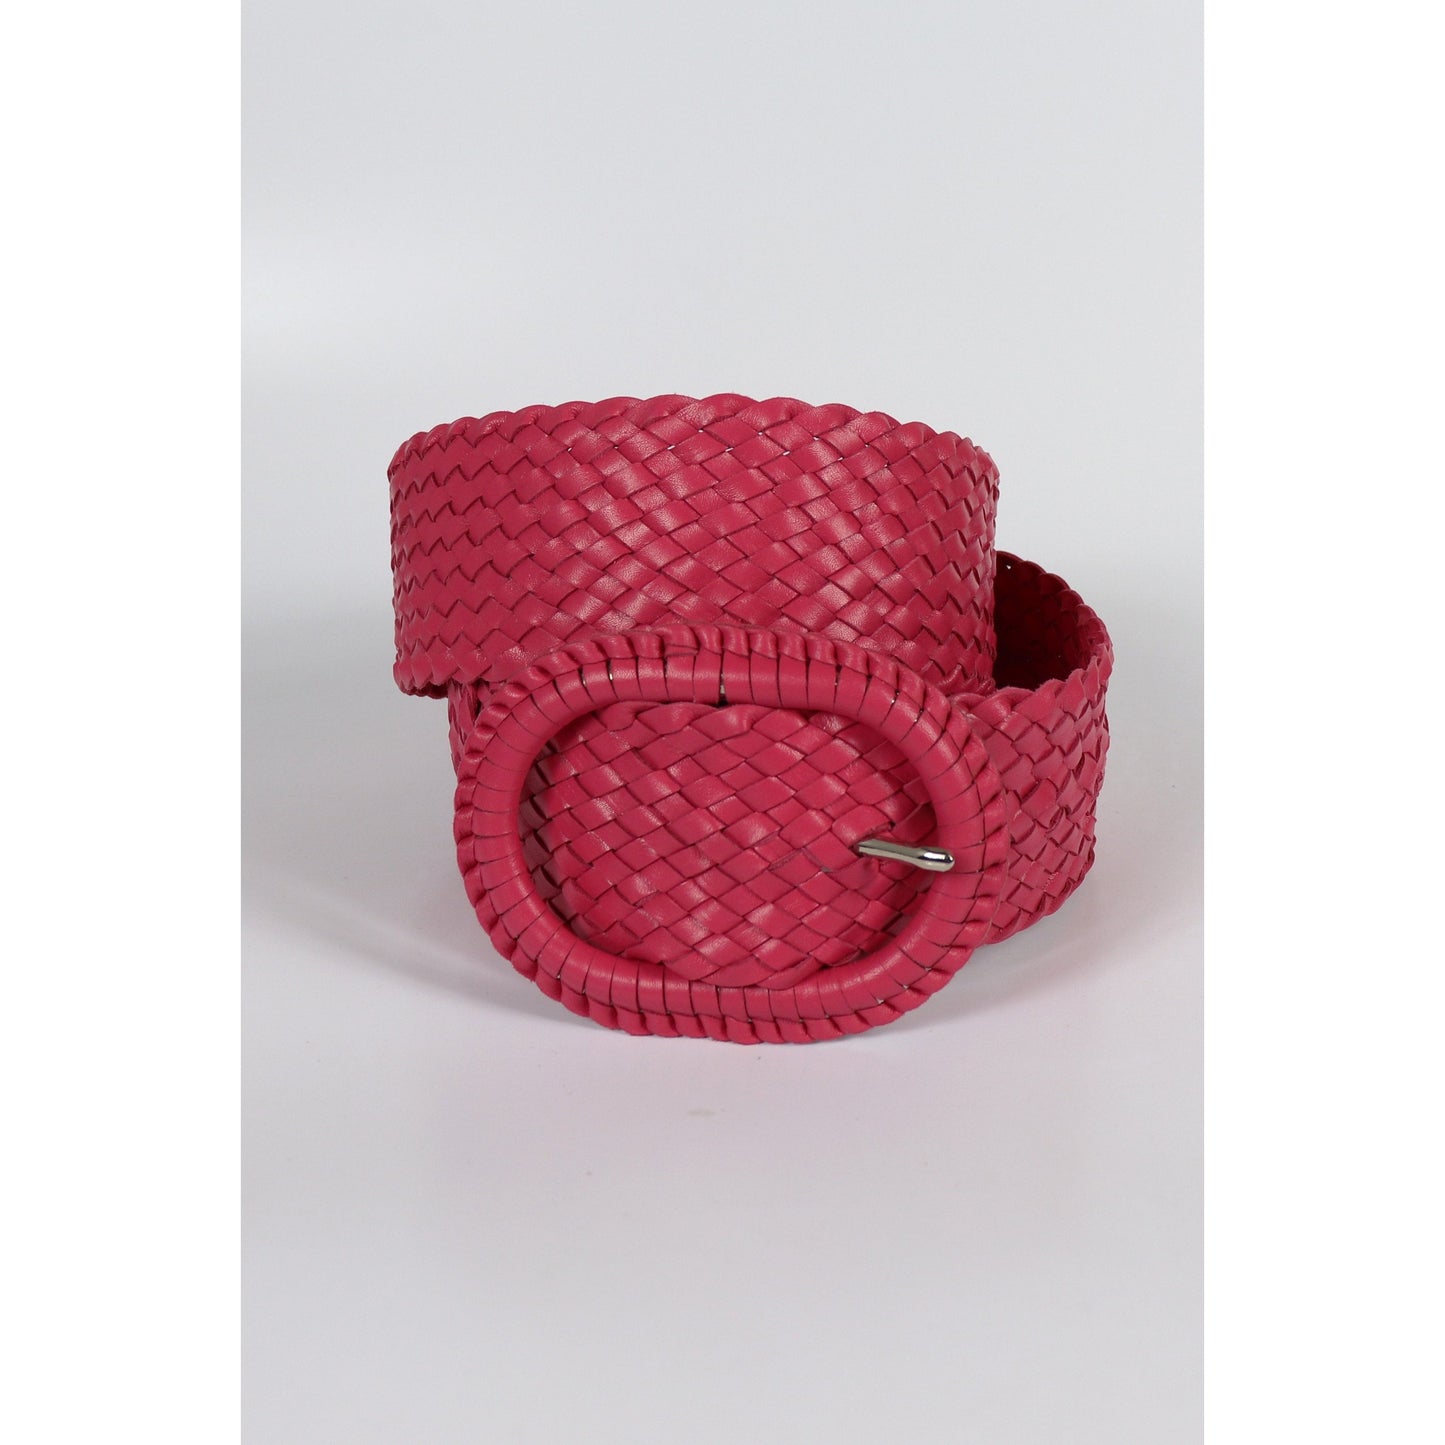 Pink woven belt with buckle.